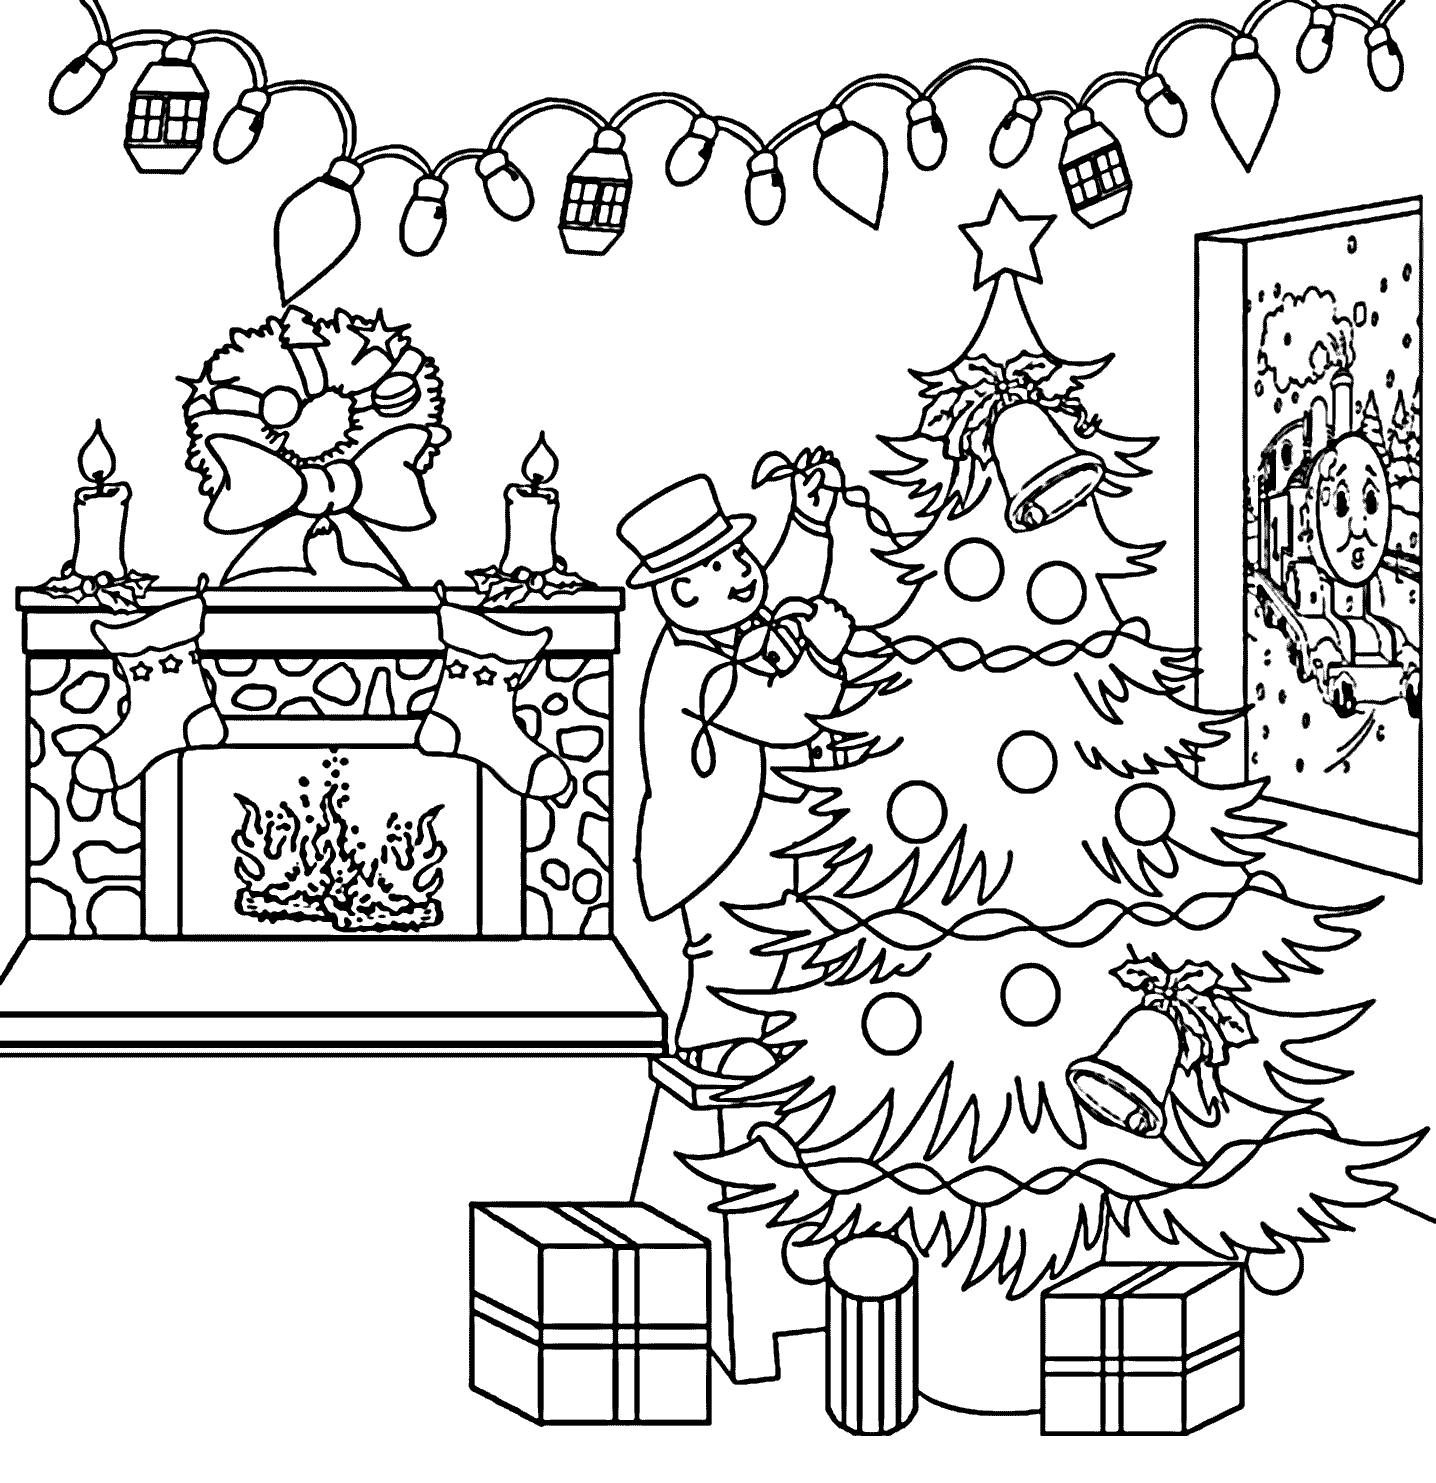 Thomas Train Decorating Christmas Coloring Page Free Coloring Pages line